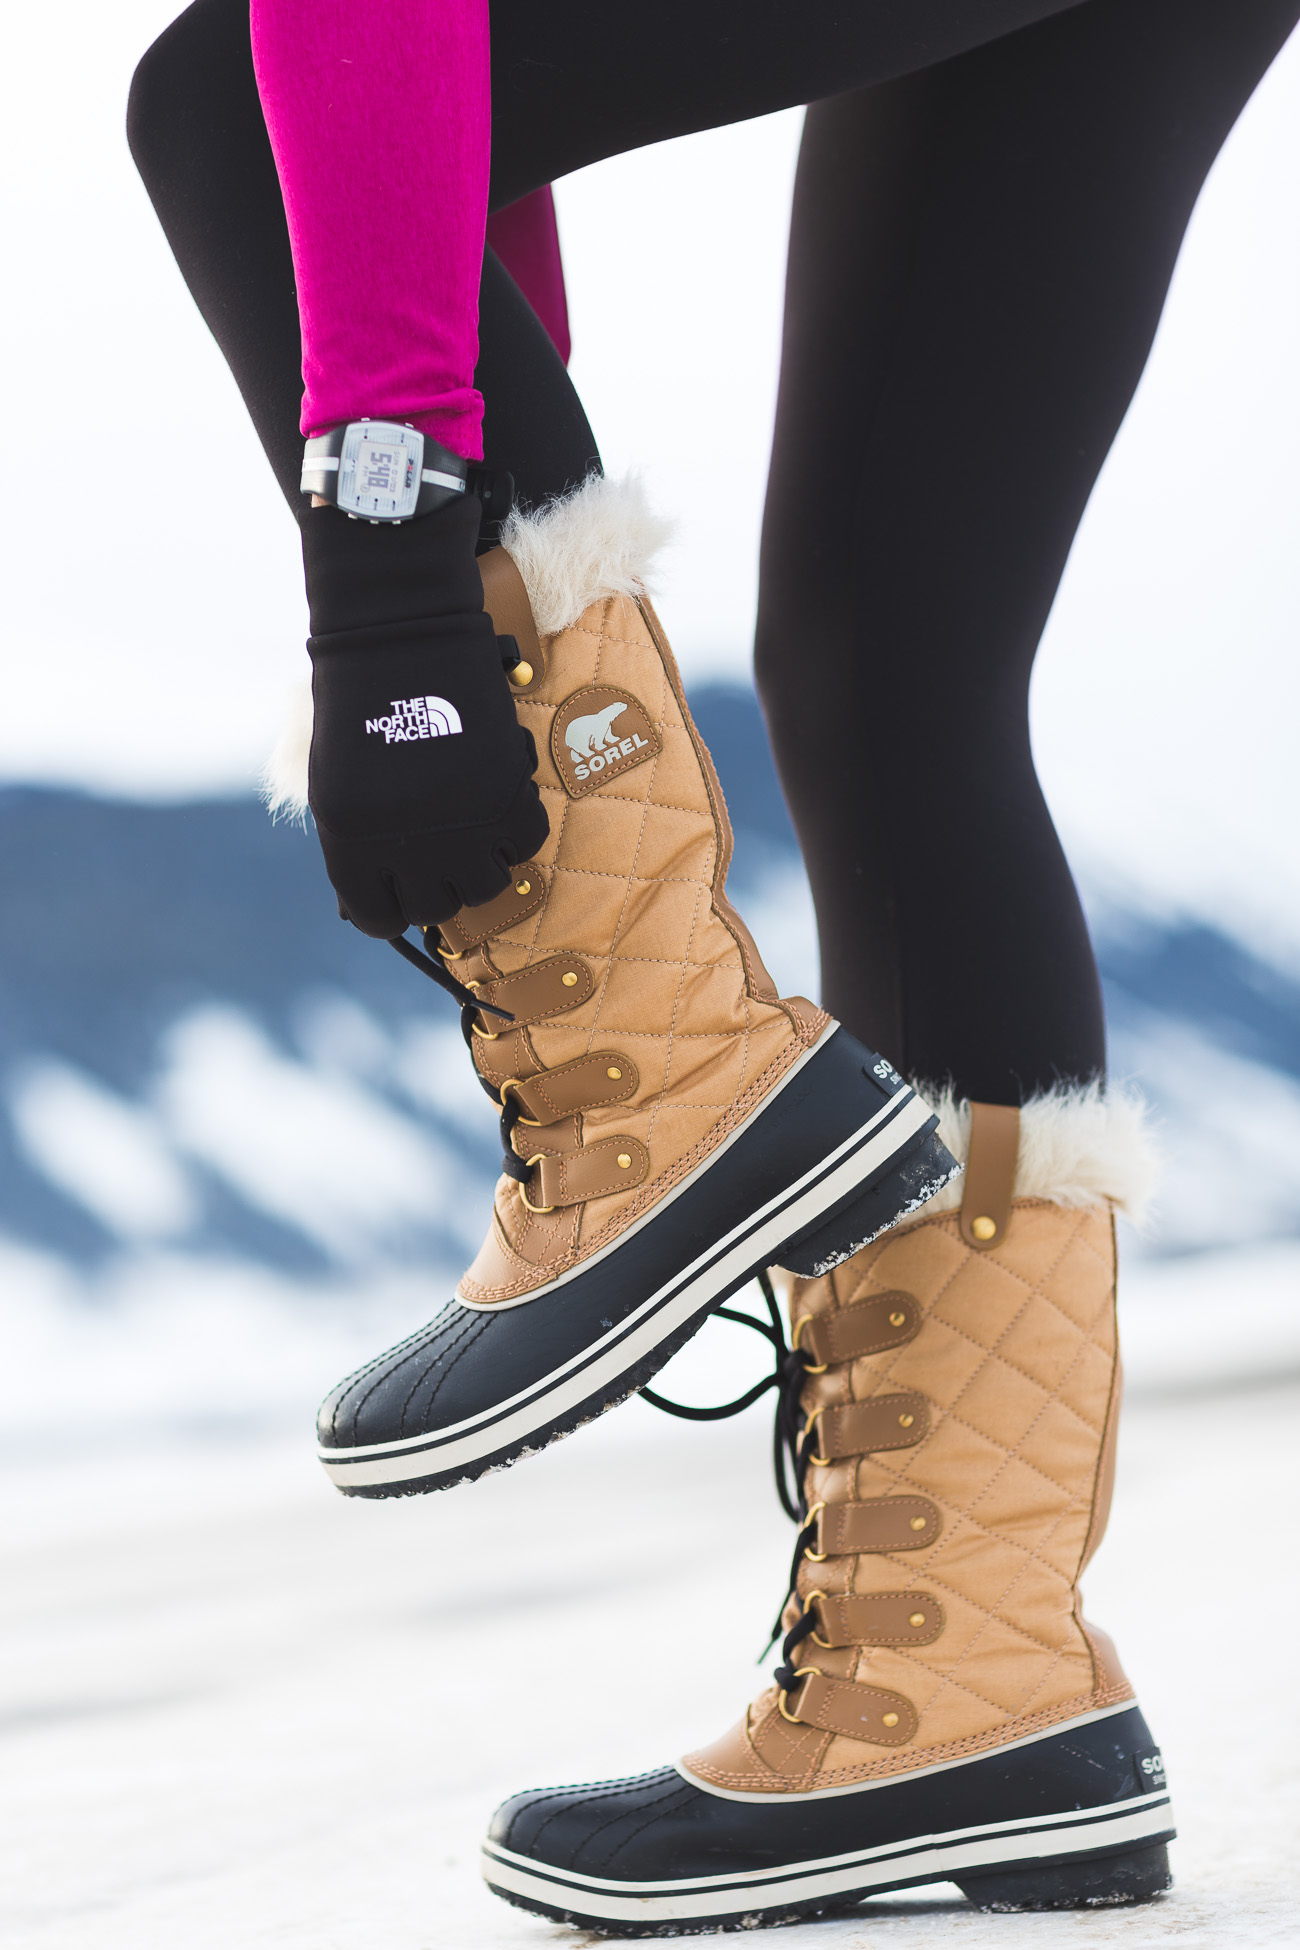 patagonia snow boots